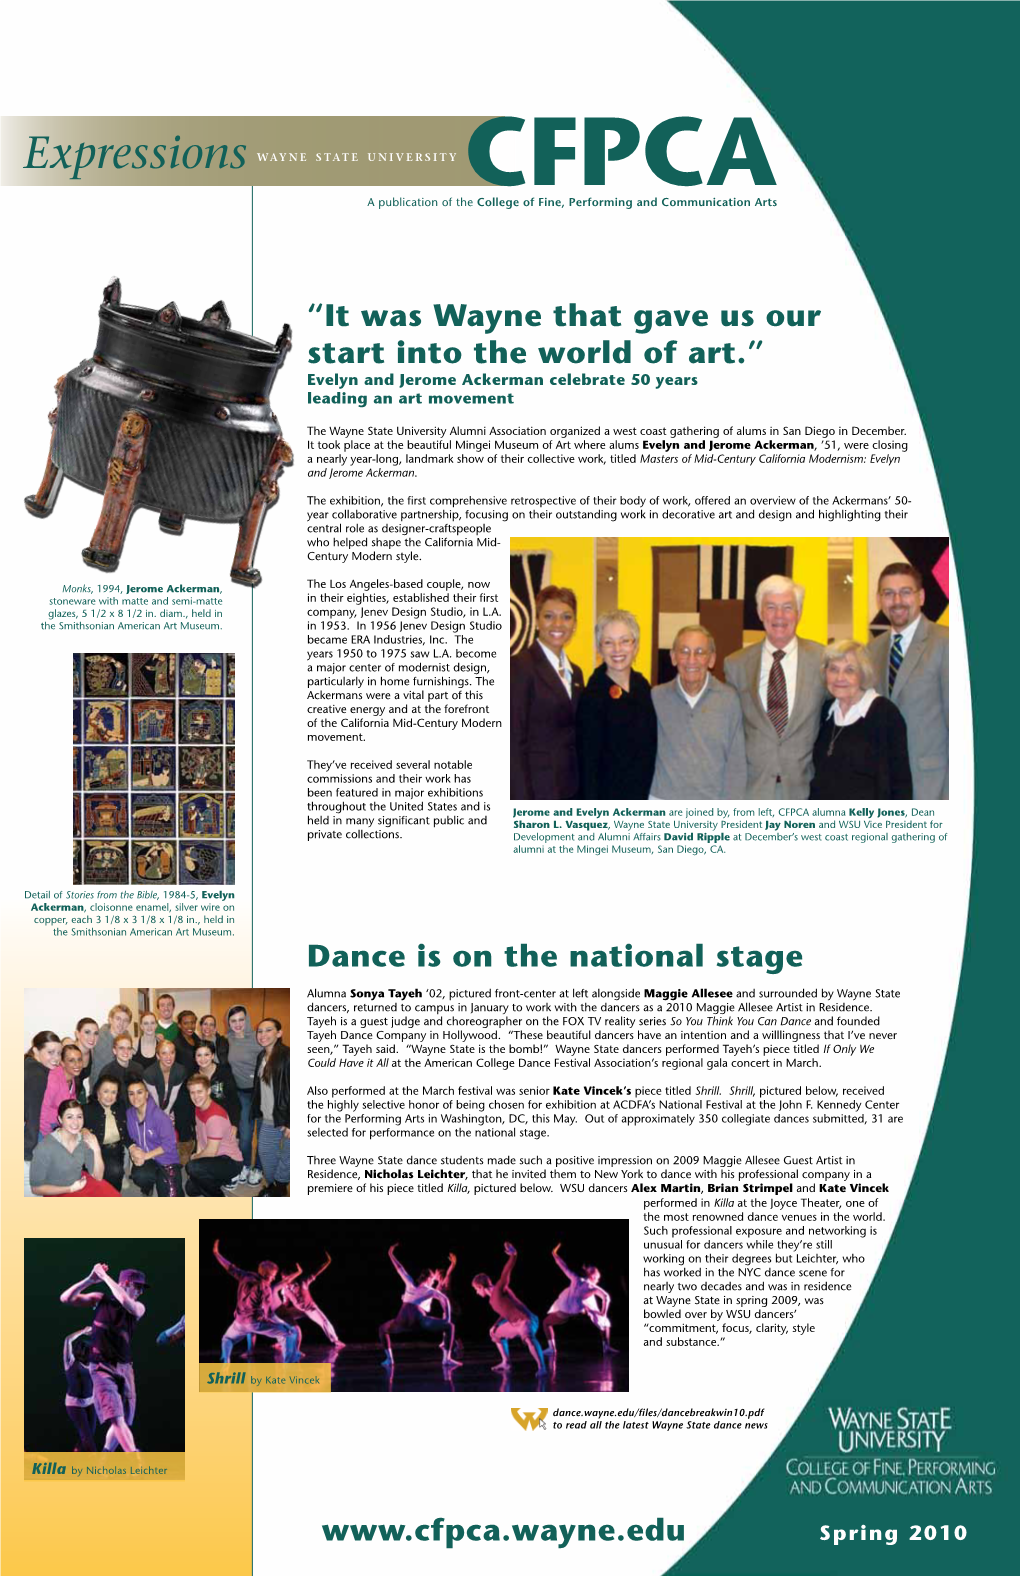 “It Was Wayne That Gave Us Our Start Into the World of Art.” Dance Is on the National Stage